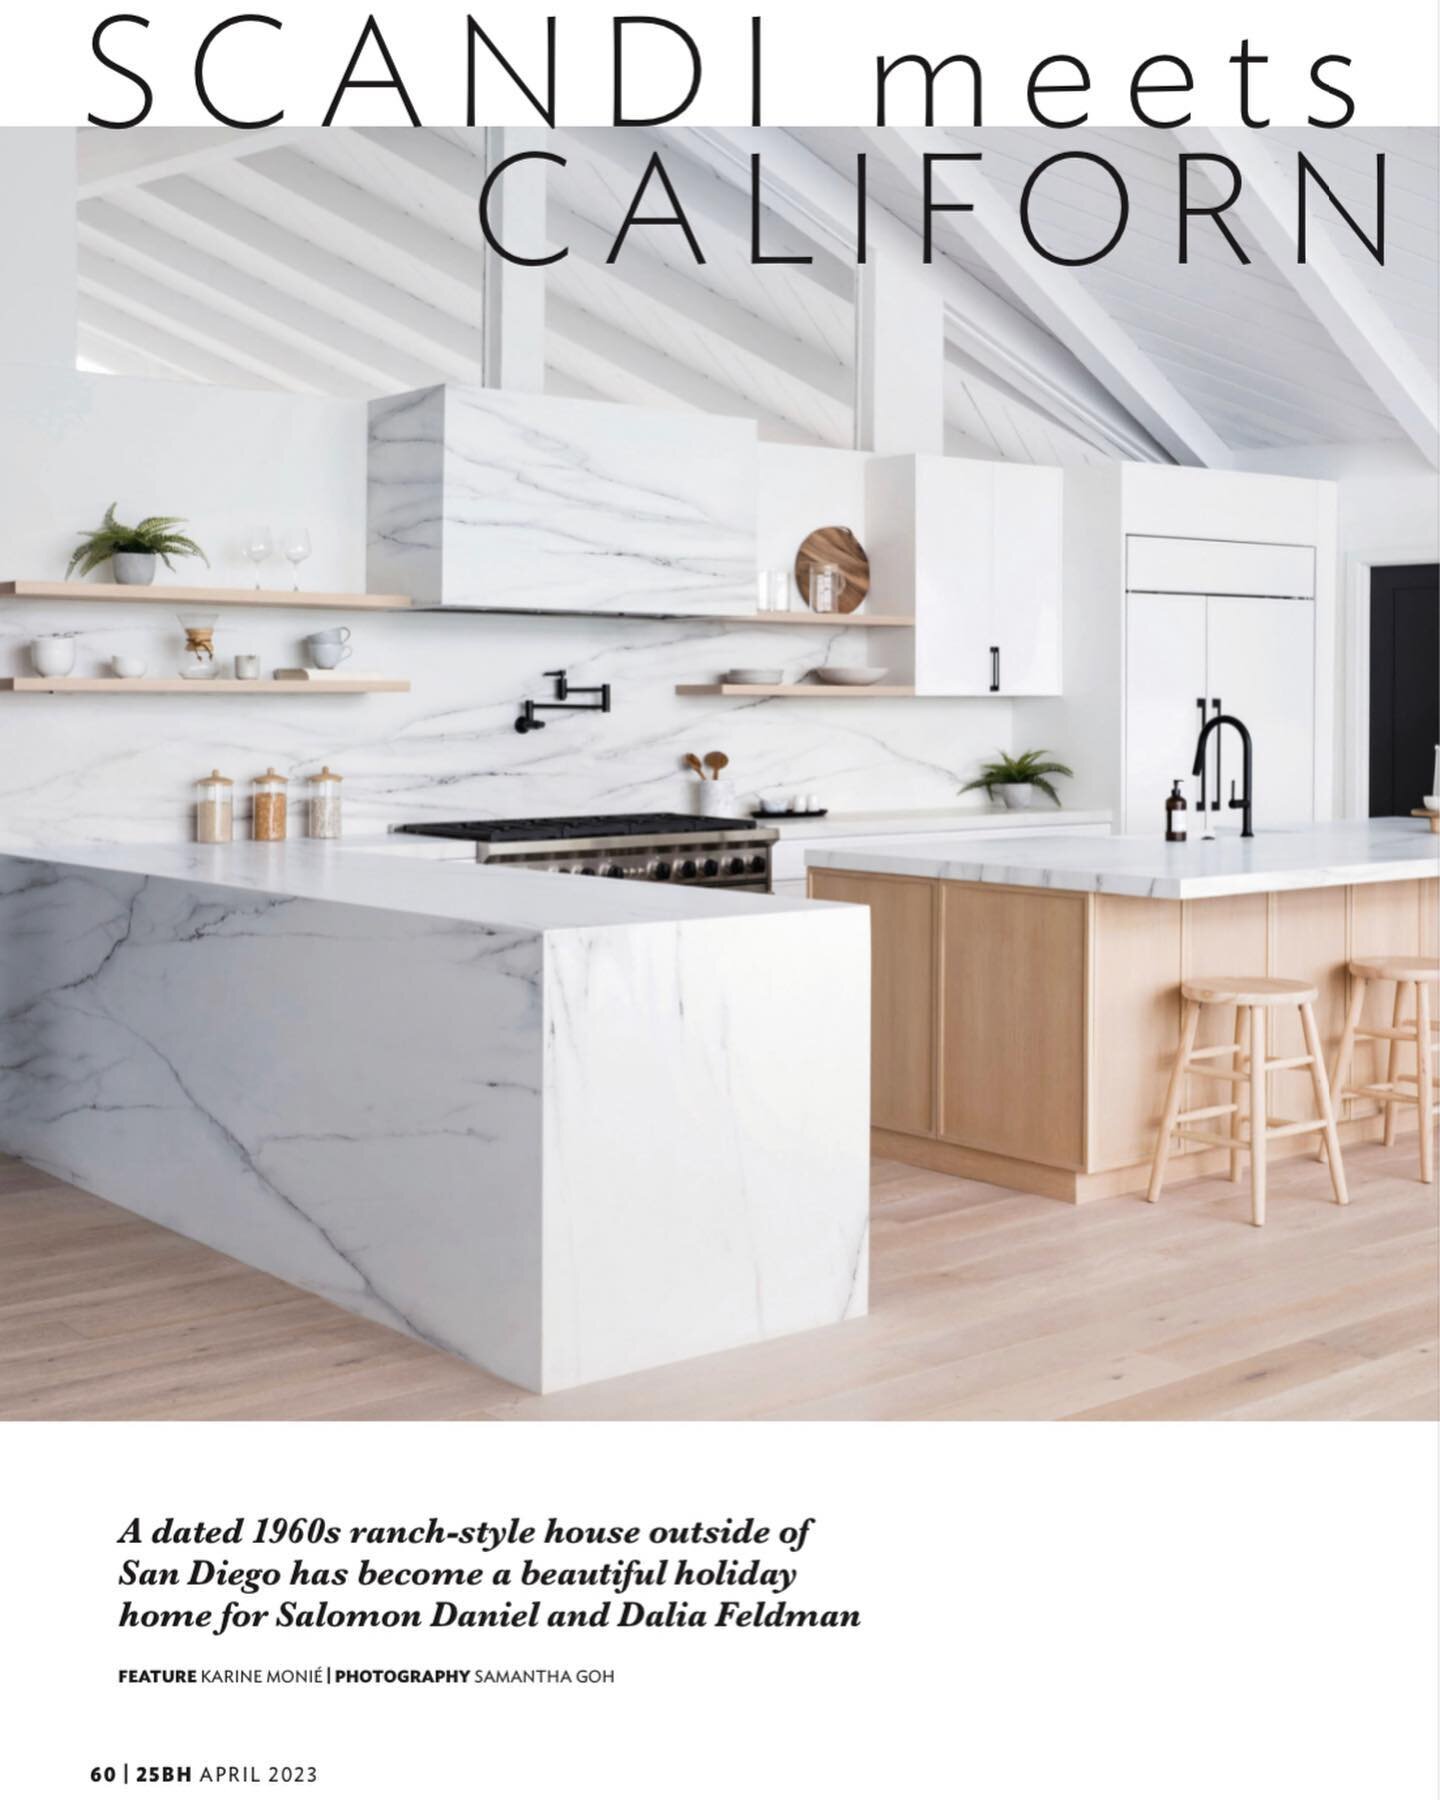 Thank you @25beautifulhomesmagazine for featuring our home in the new April issue 🫶🏼
 
🖋️ @karinemonie 
📷 @samanthagohphoto 

Originally built in the 1960s, the California ranch-style property features a strong mid-century influence that the duo 